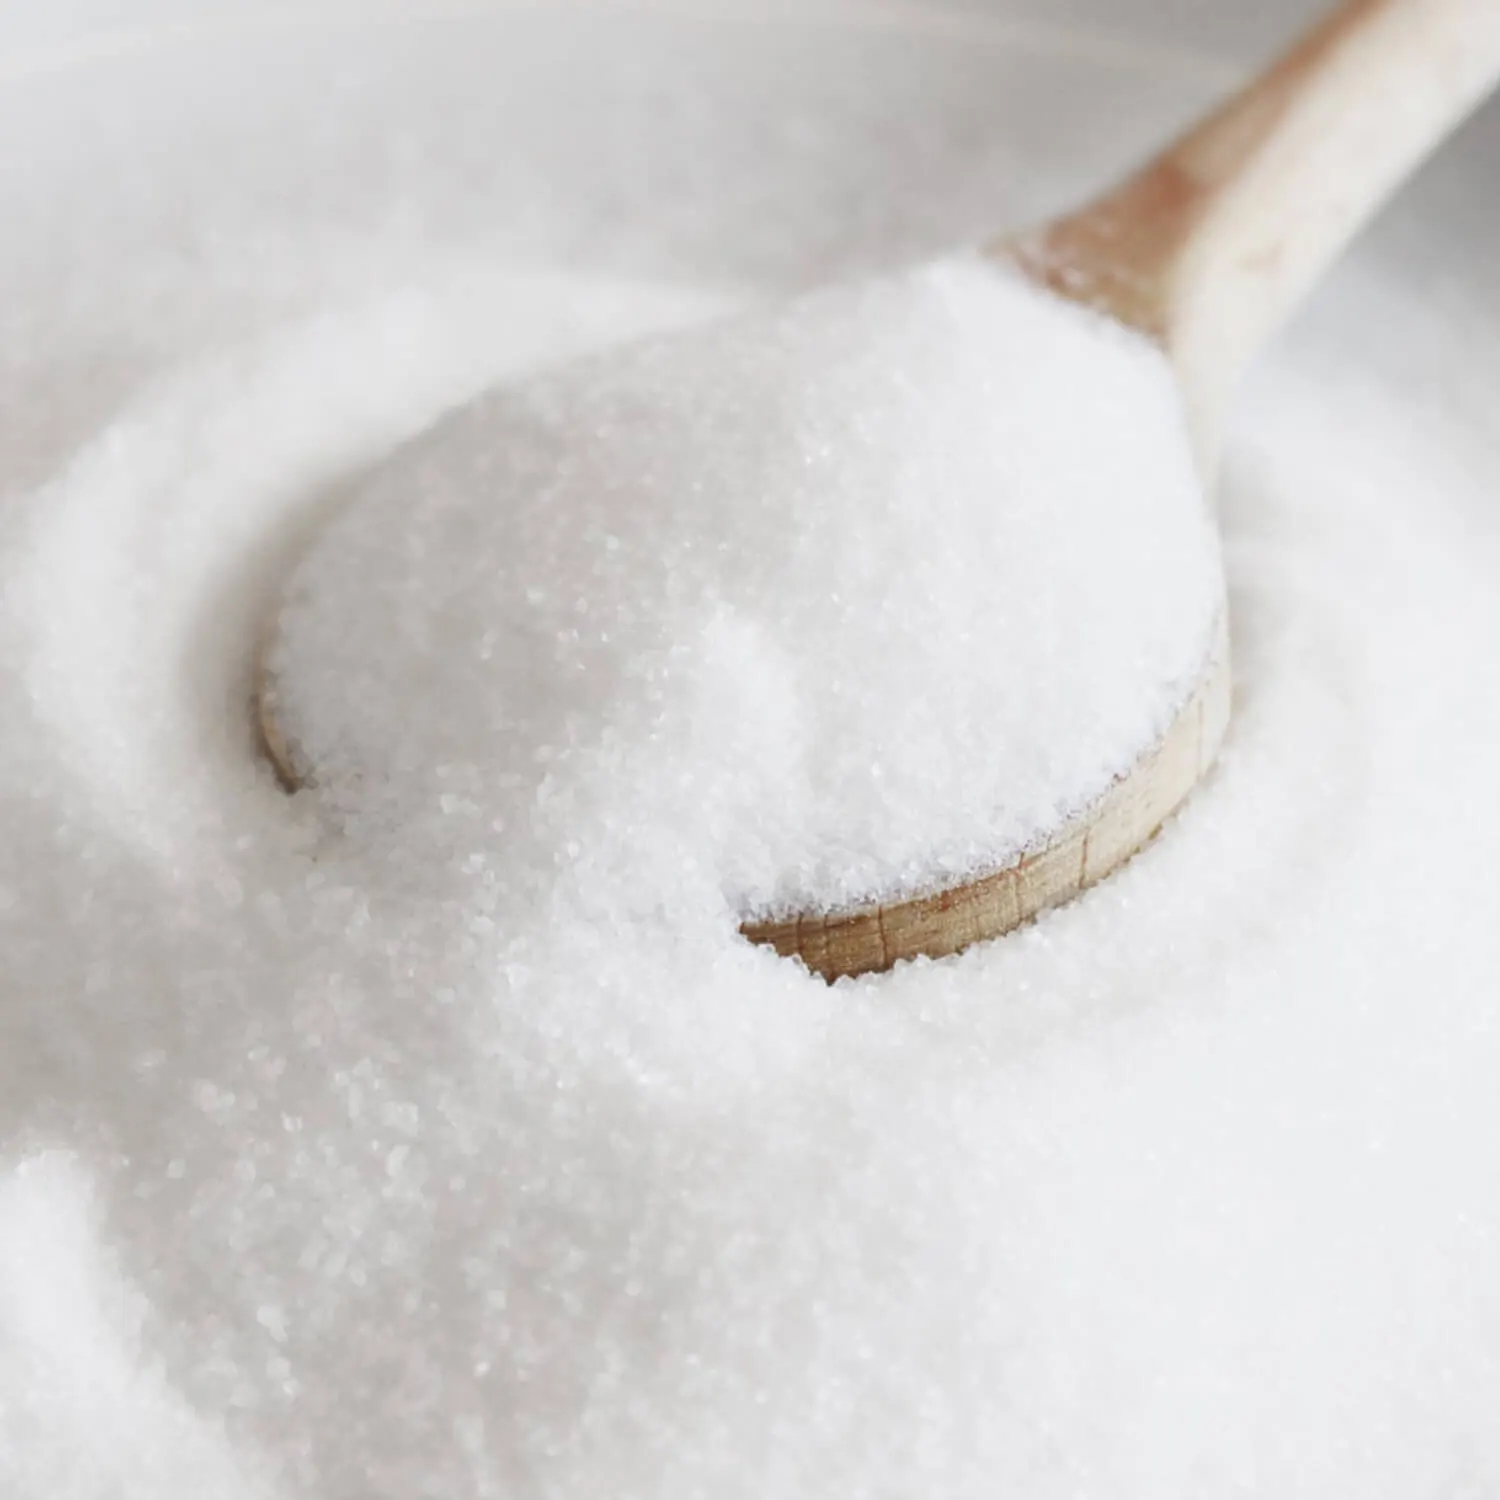 Erythritol is a sweet-tasting compound that chemically belongs to the sugar alcohols.